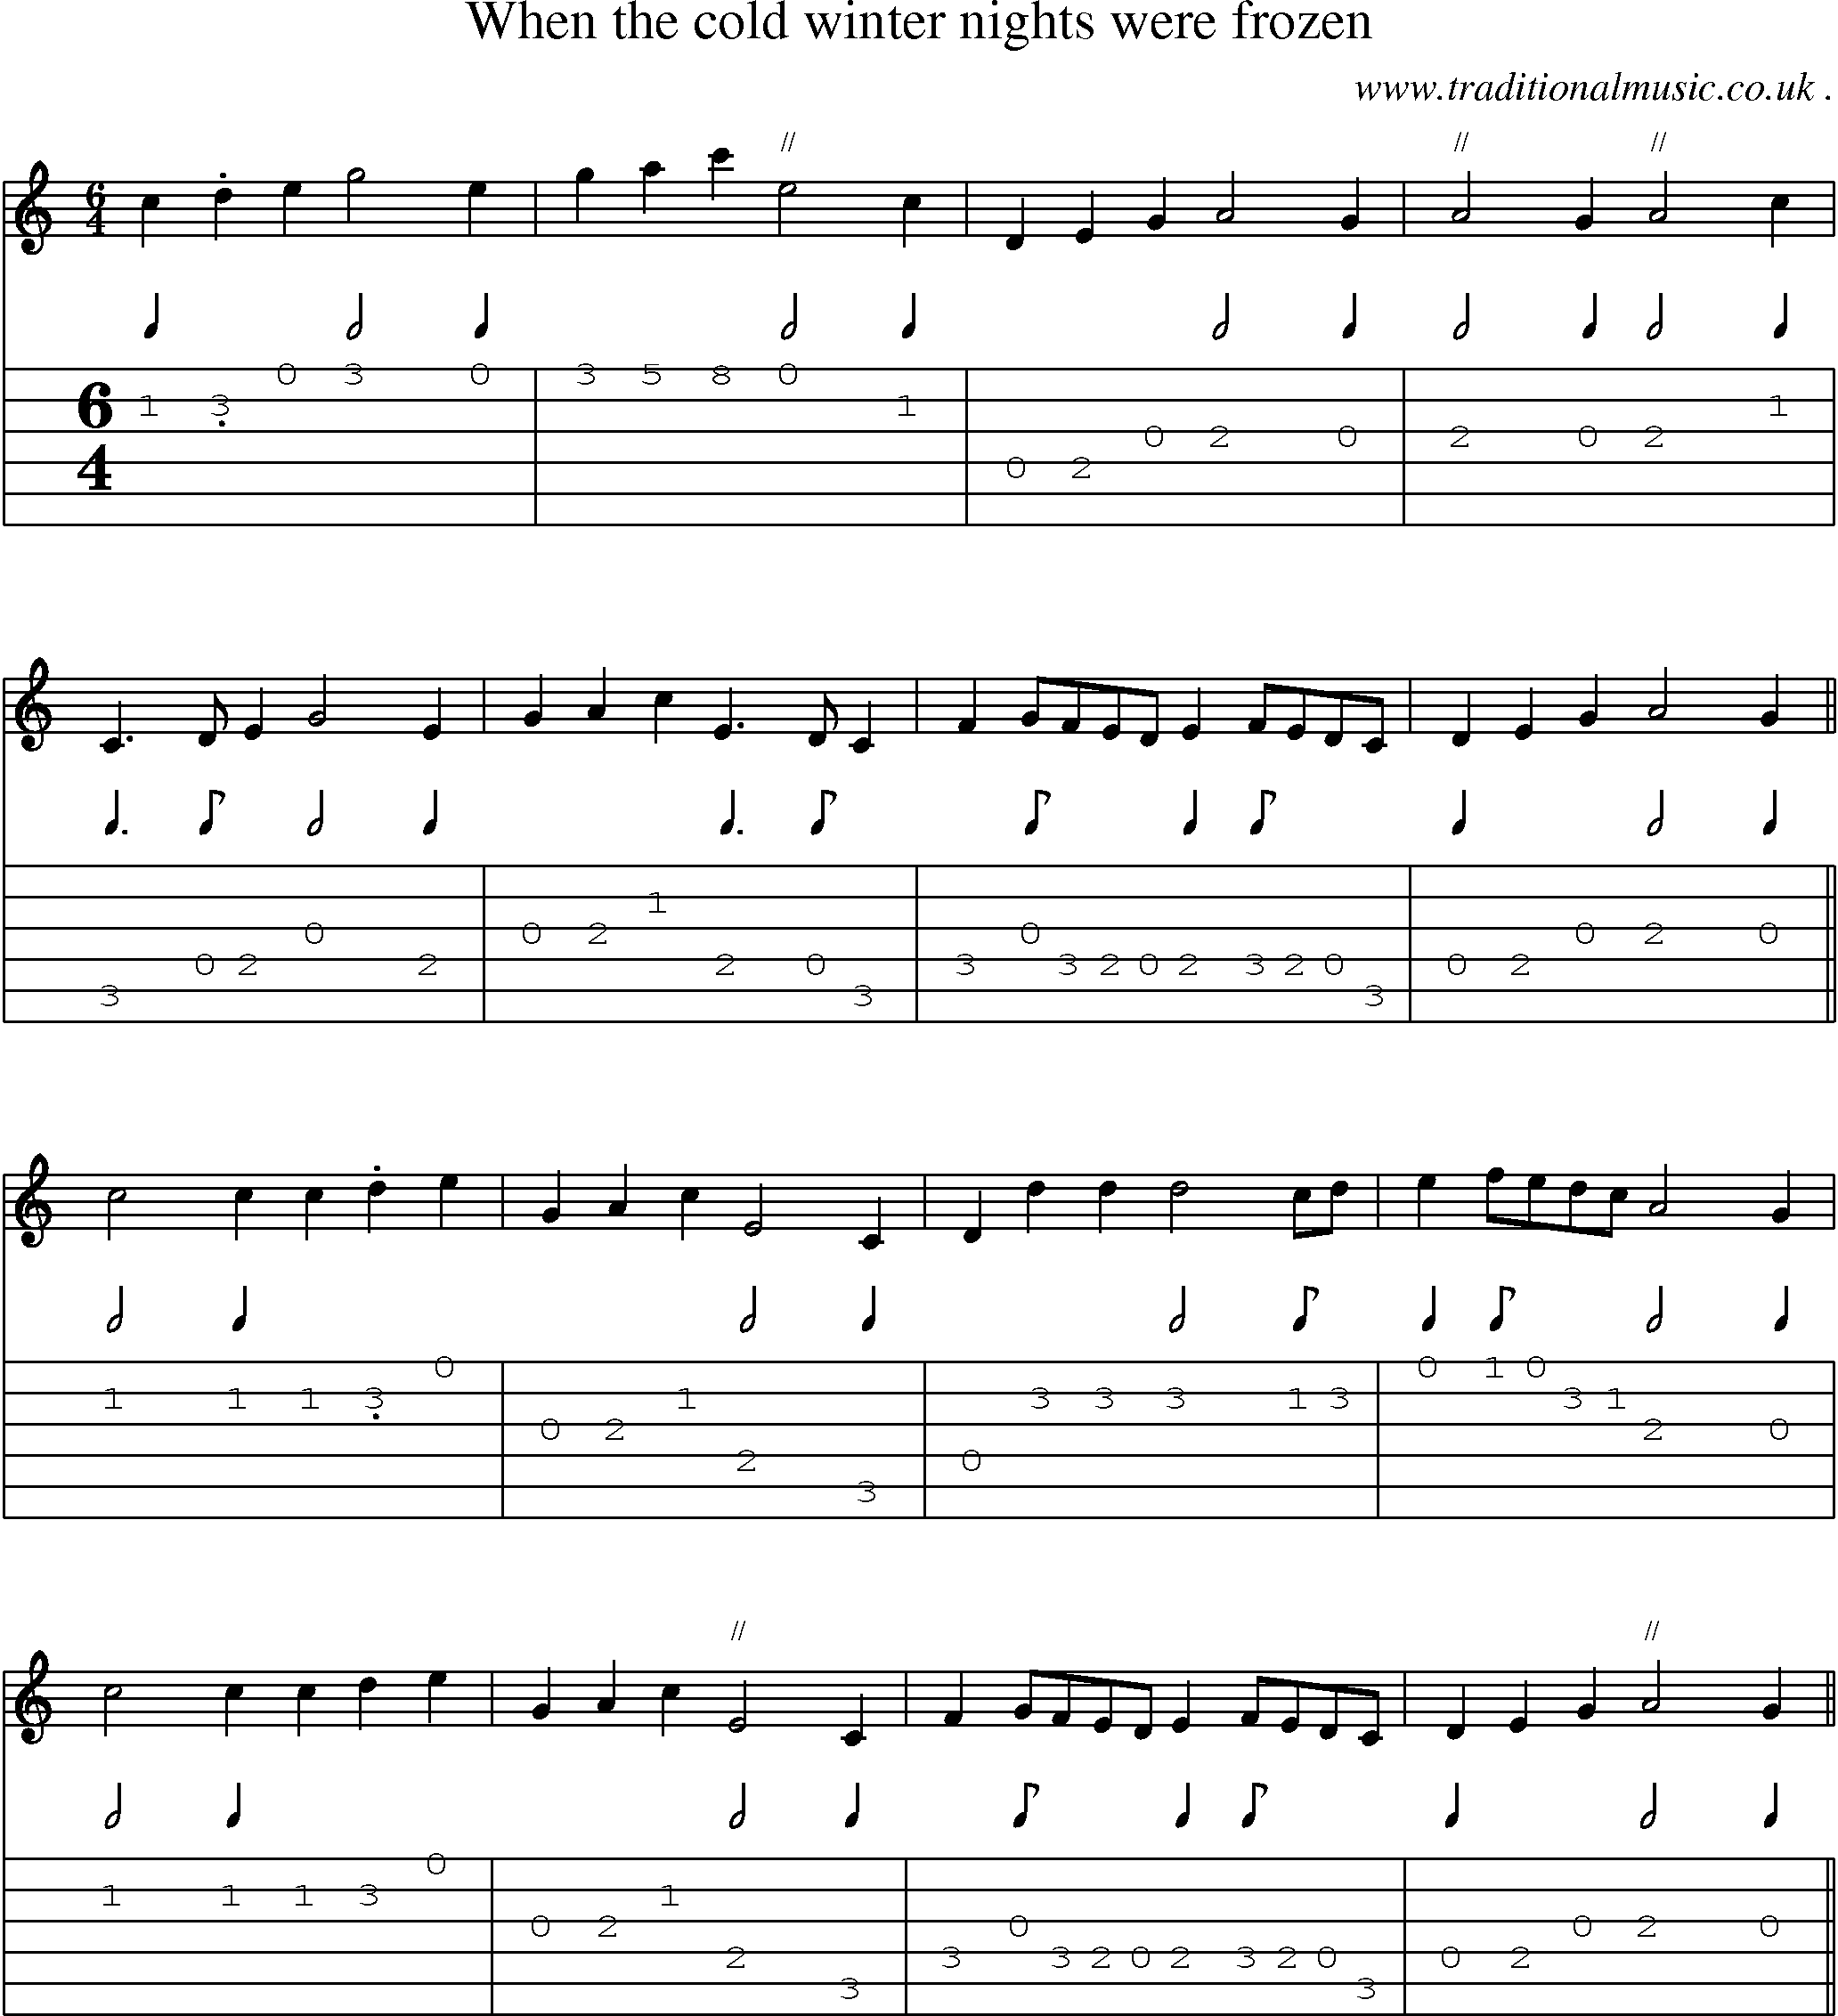 Sheet-music  score, Chords and Guitar Tabs for When The Cold Winter Nights Were Frozen